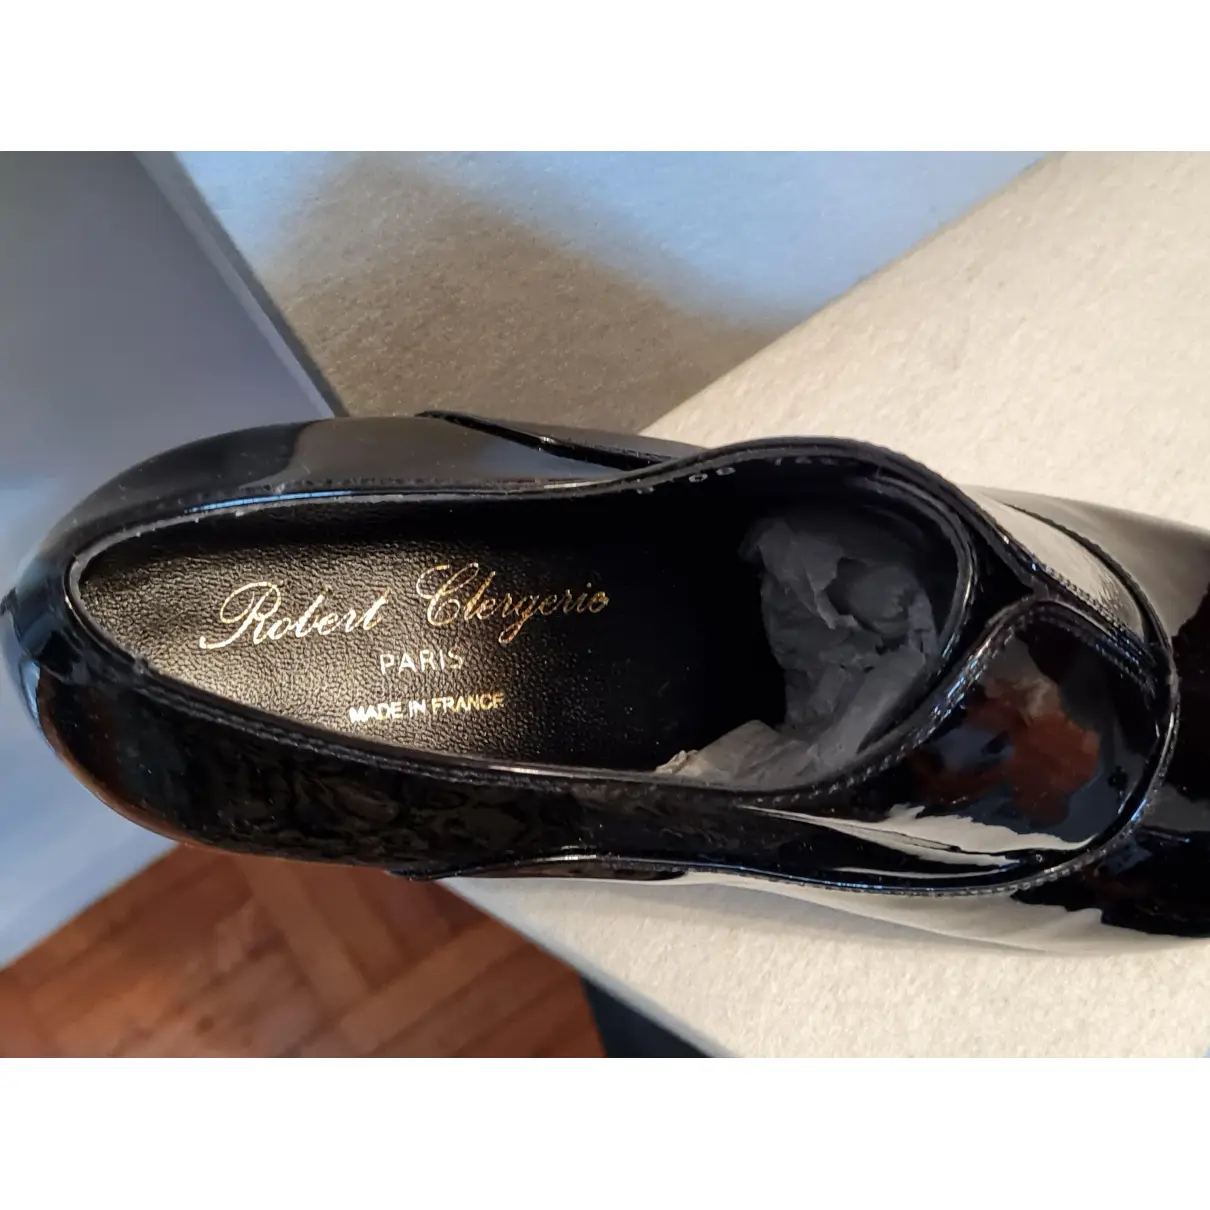 Buy Robert Clergerie Patent leather flats online